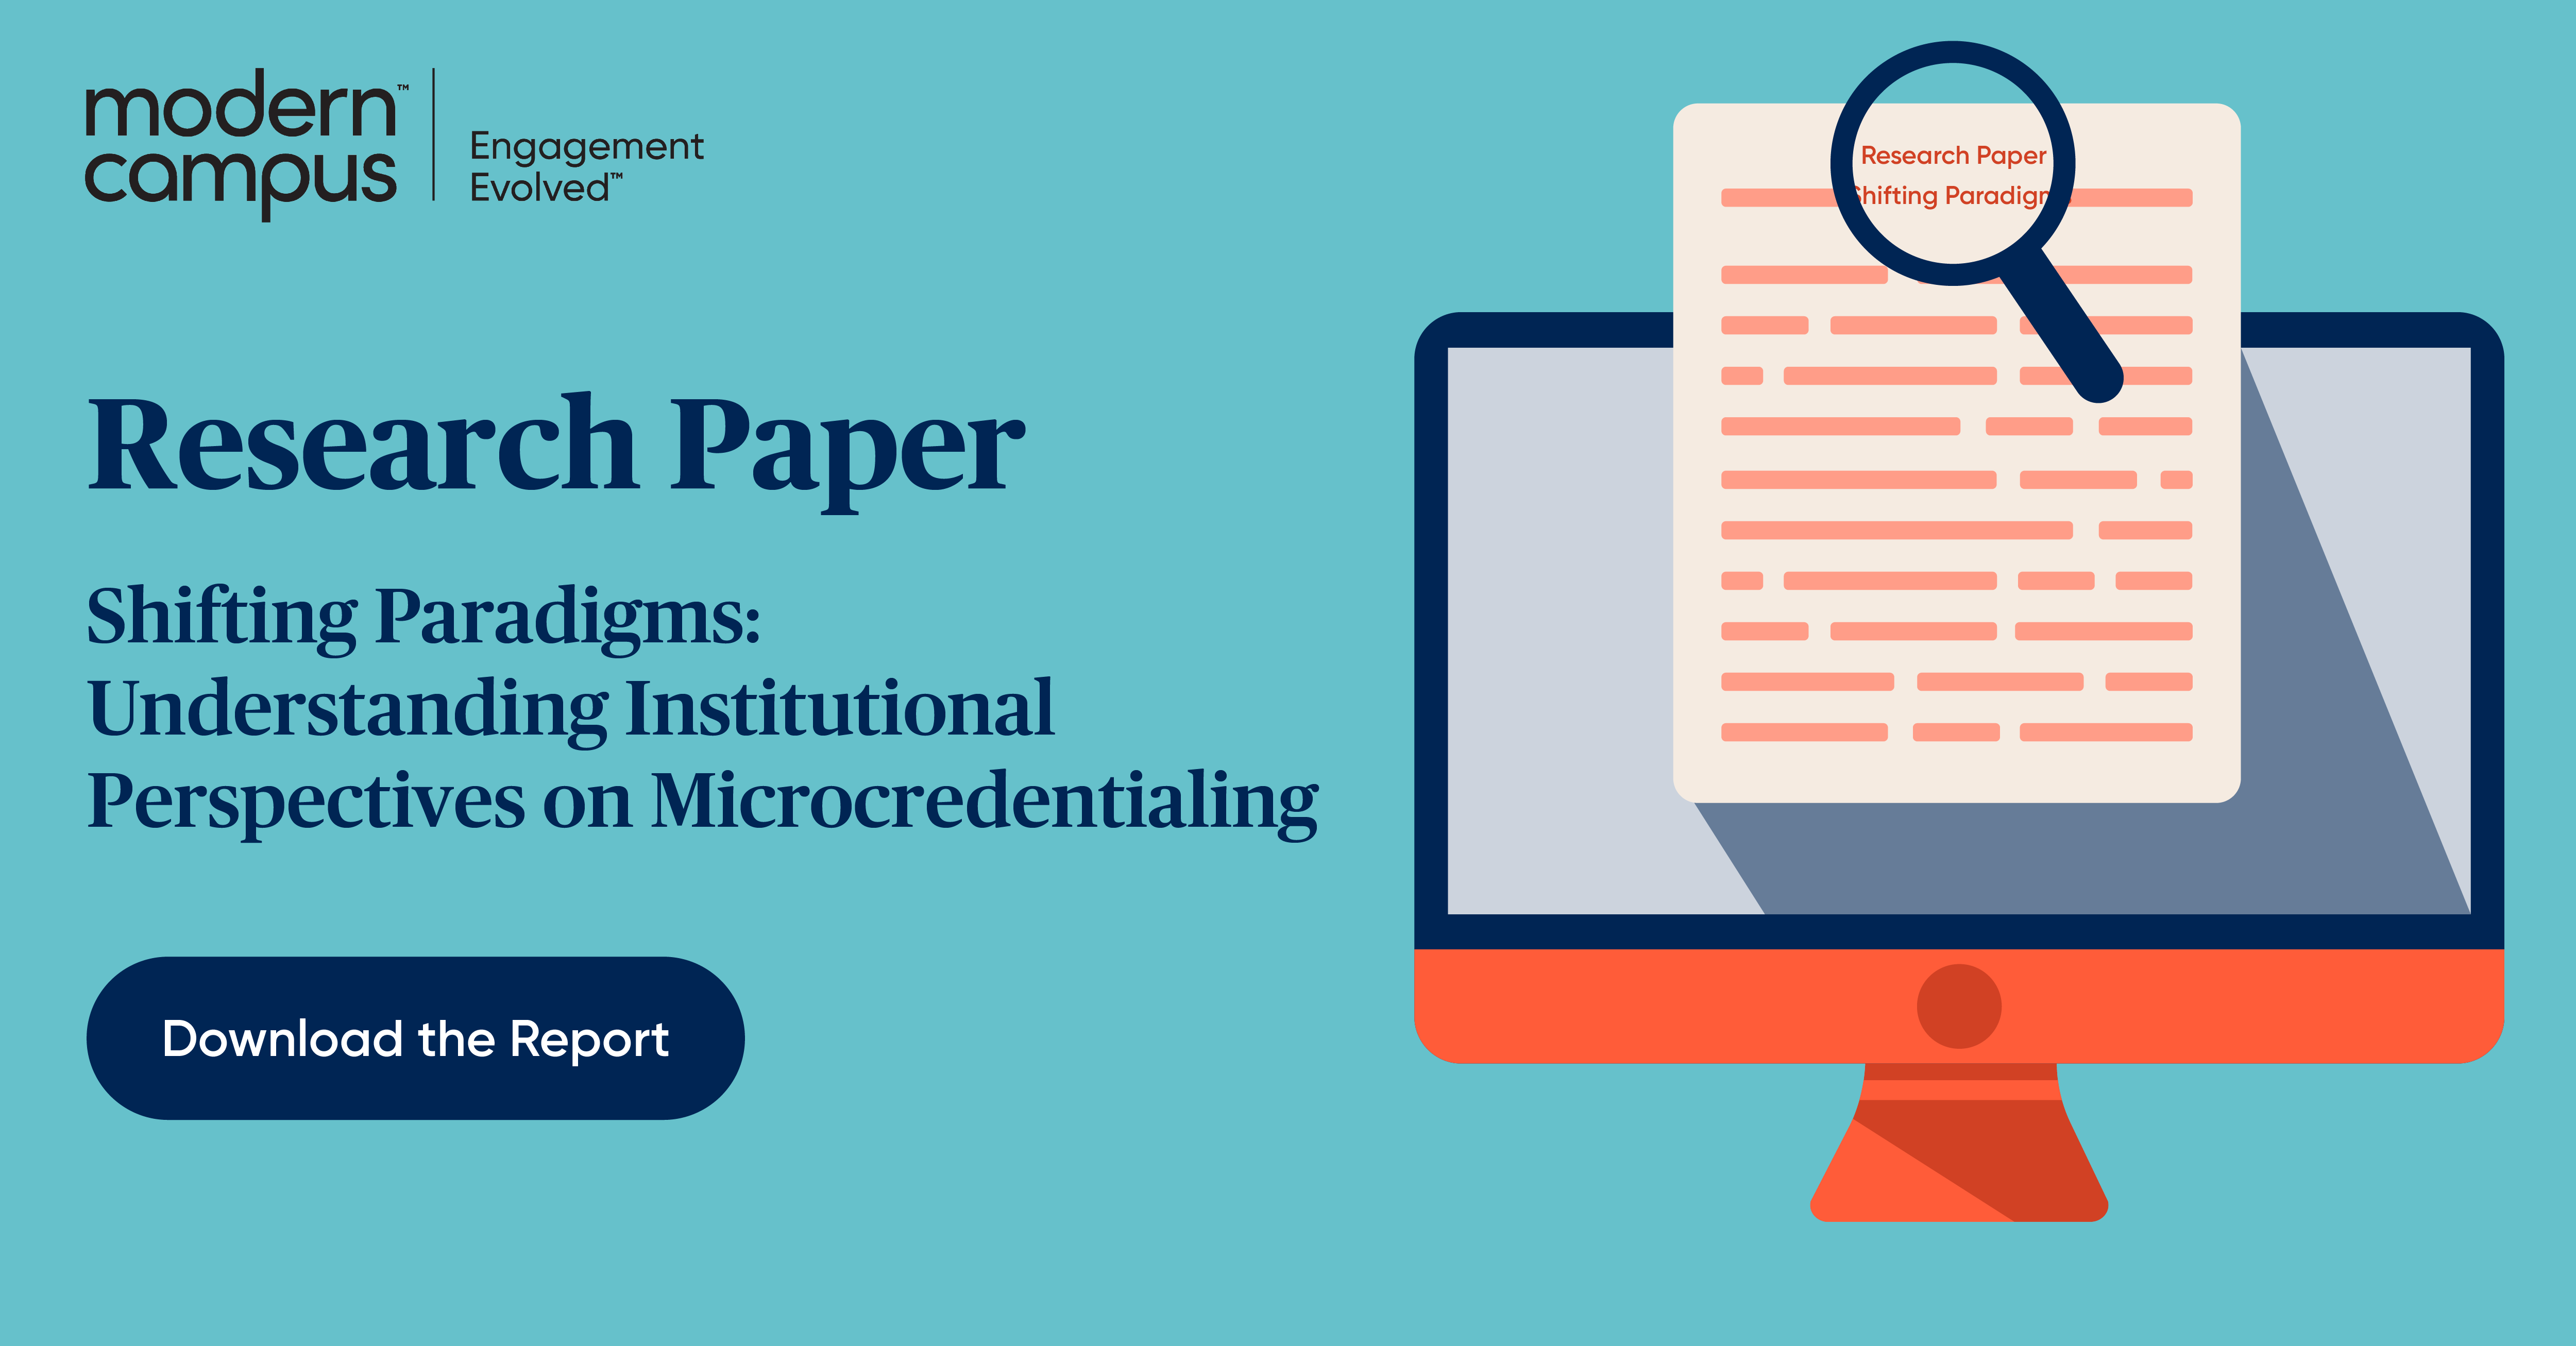 research paper: Shifting Paradigms:Understanding Institutional Perspectives on Microcredentialing — download now